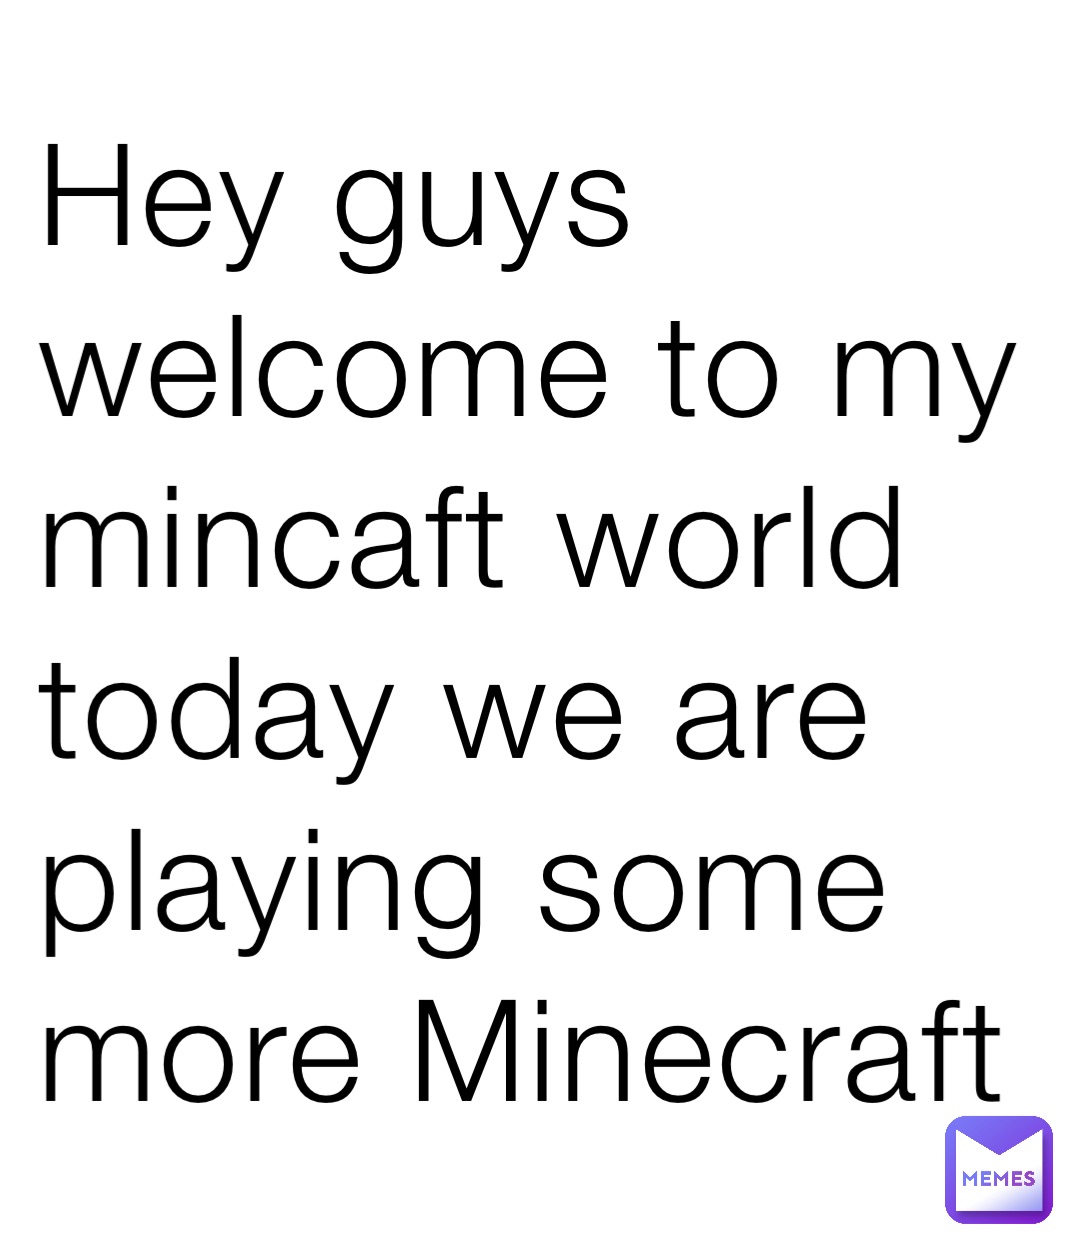 Hey guys welcome to my mincaft world today we are playing some more Minecraft